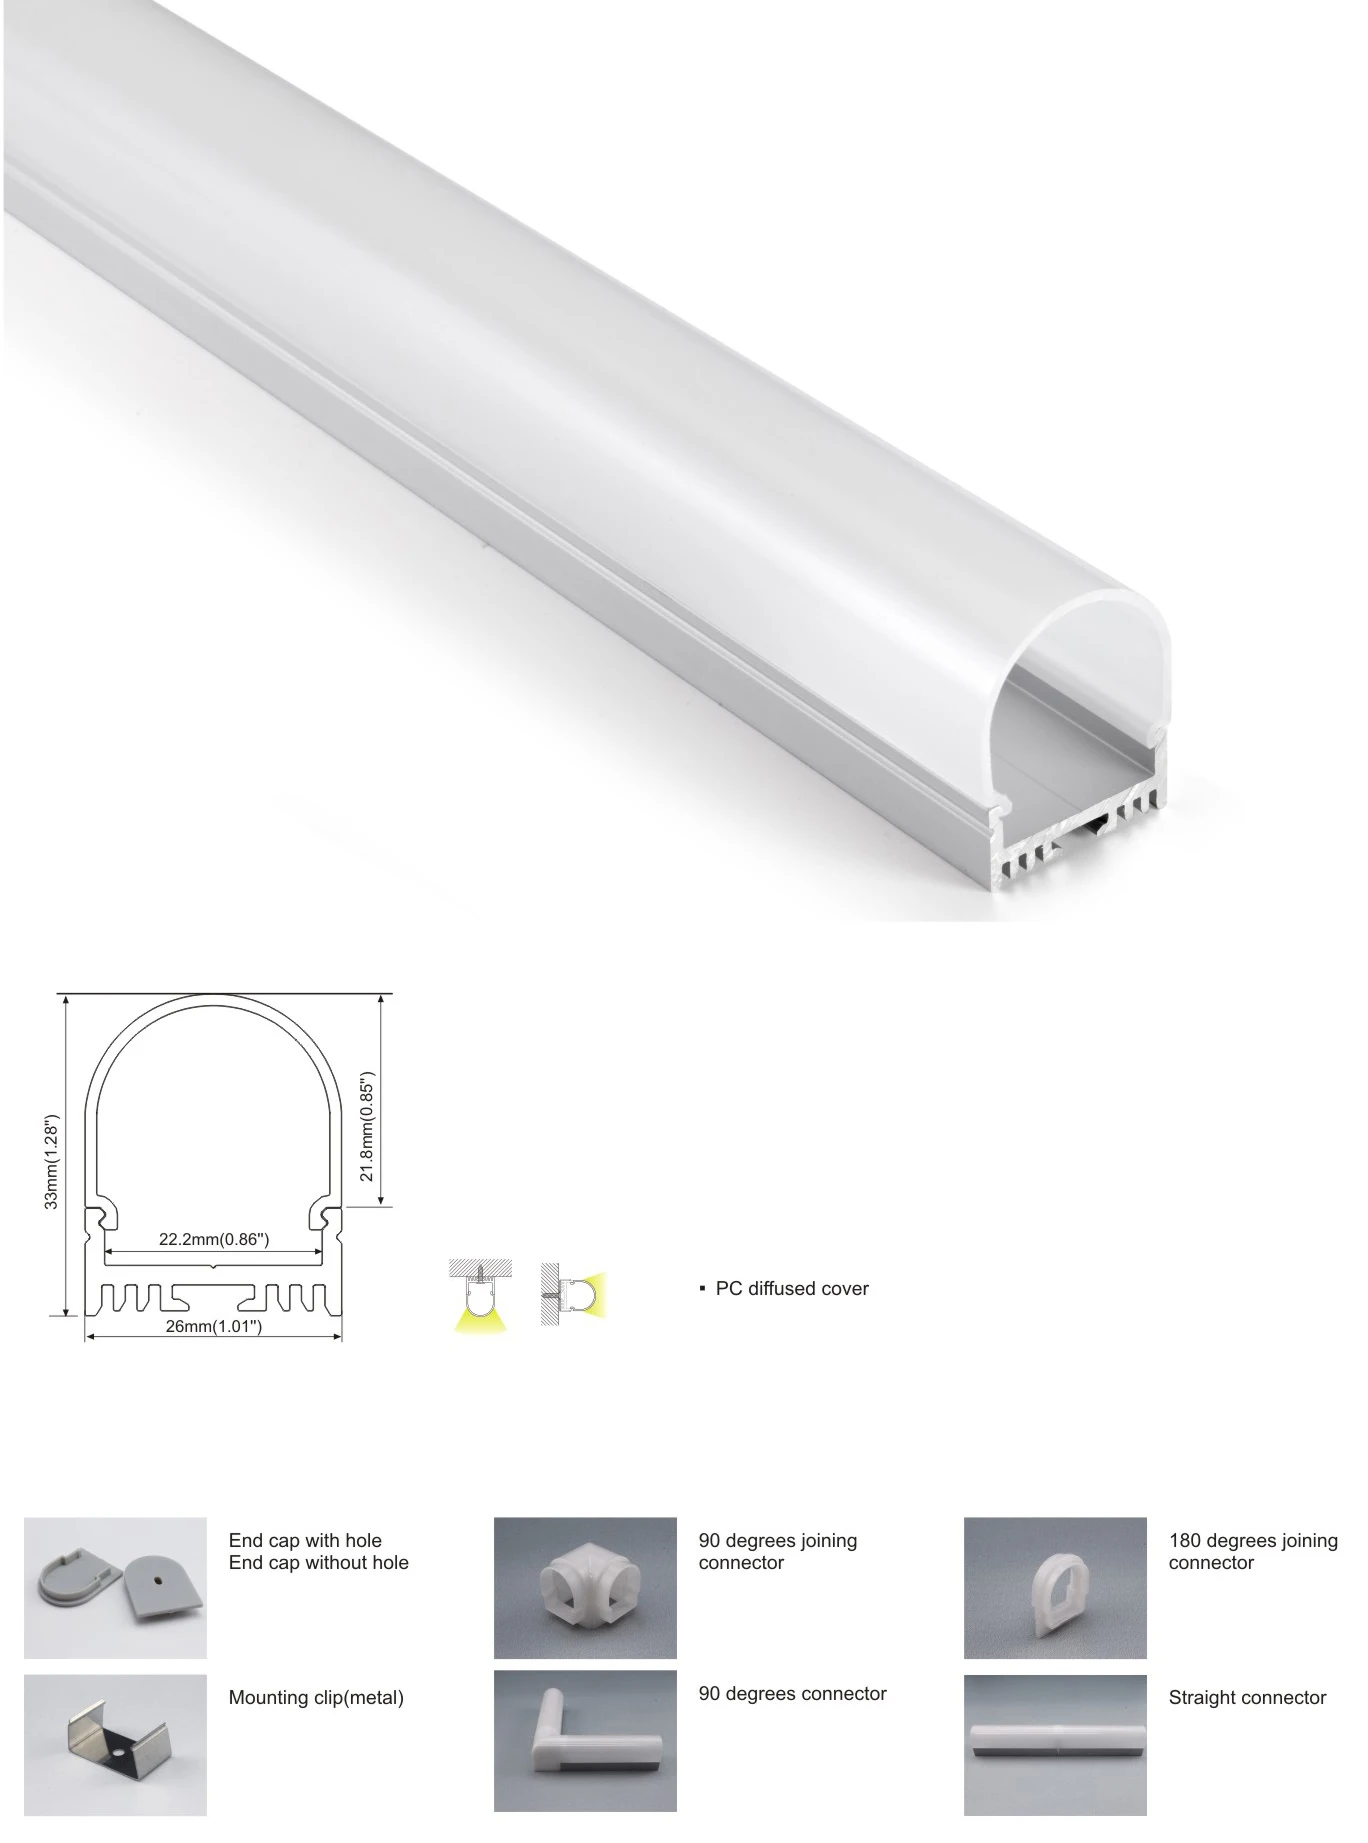 24 x 15mm Aluminum LED Profile for LED Rigid Strip Lighting with Ceiling or Wall Mounting